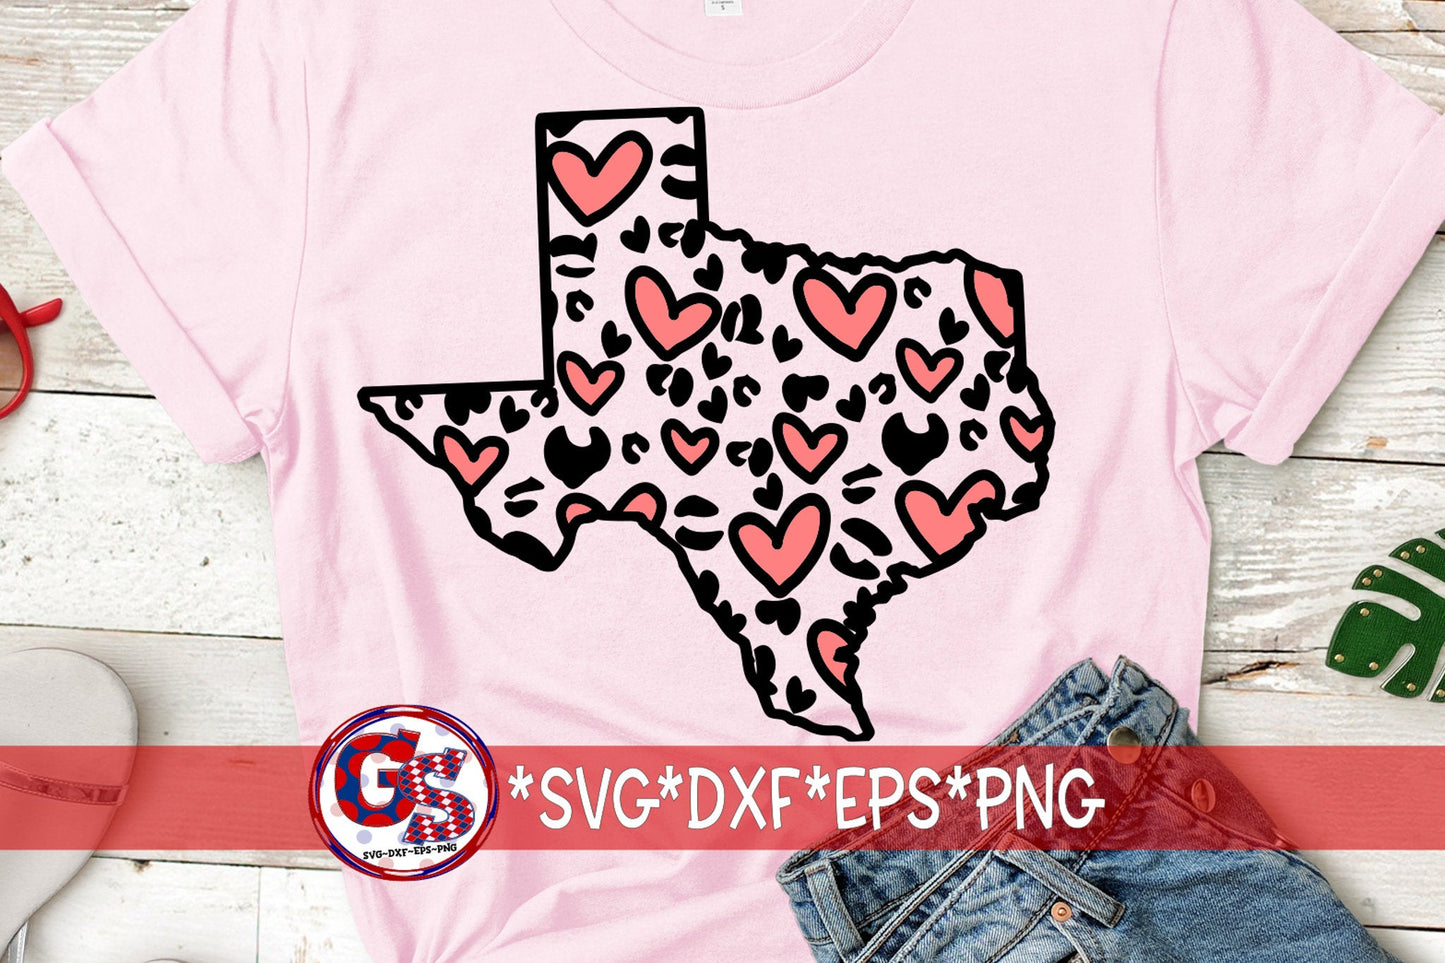 Heart Leopard Print Texas svg dxf eps png | Valentine&#39;s Day SvG | Heart SvG | Heart Texas SvG | Valentine&#39;s Day SvG | Instant Download Cut